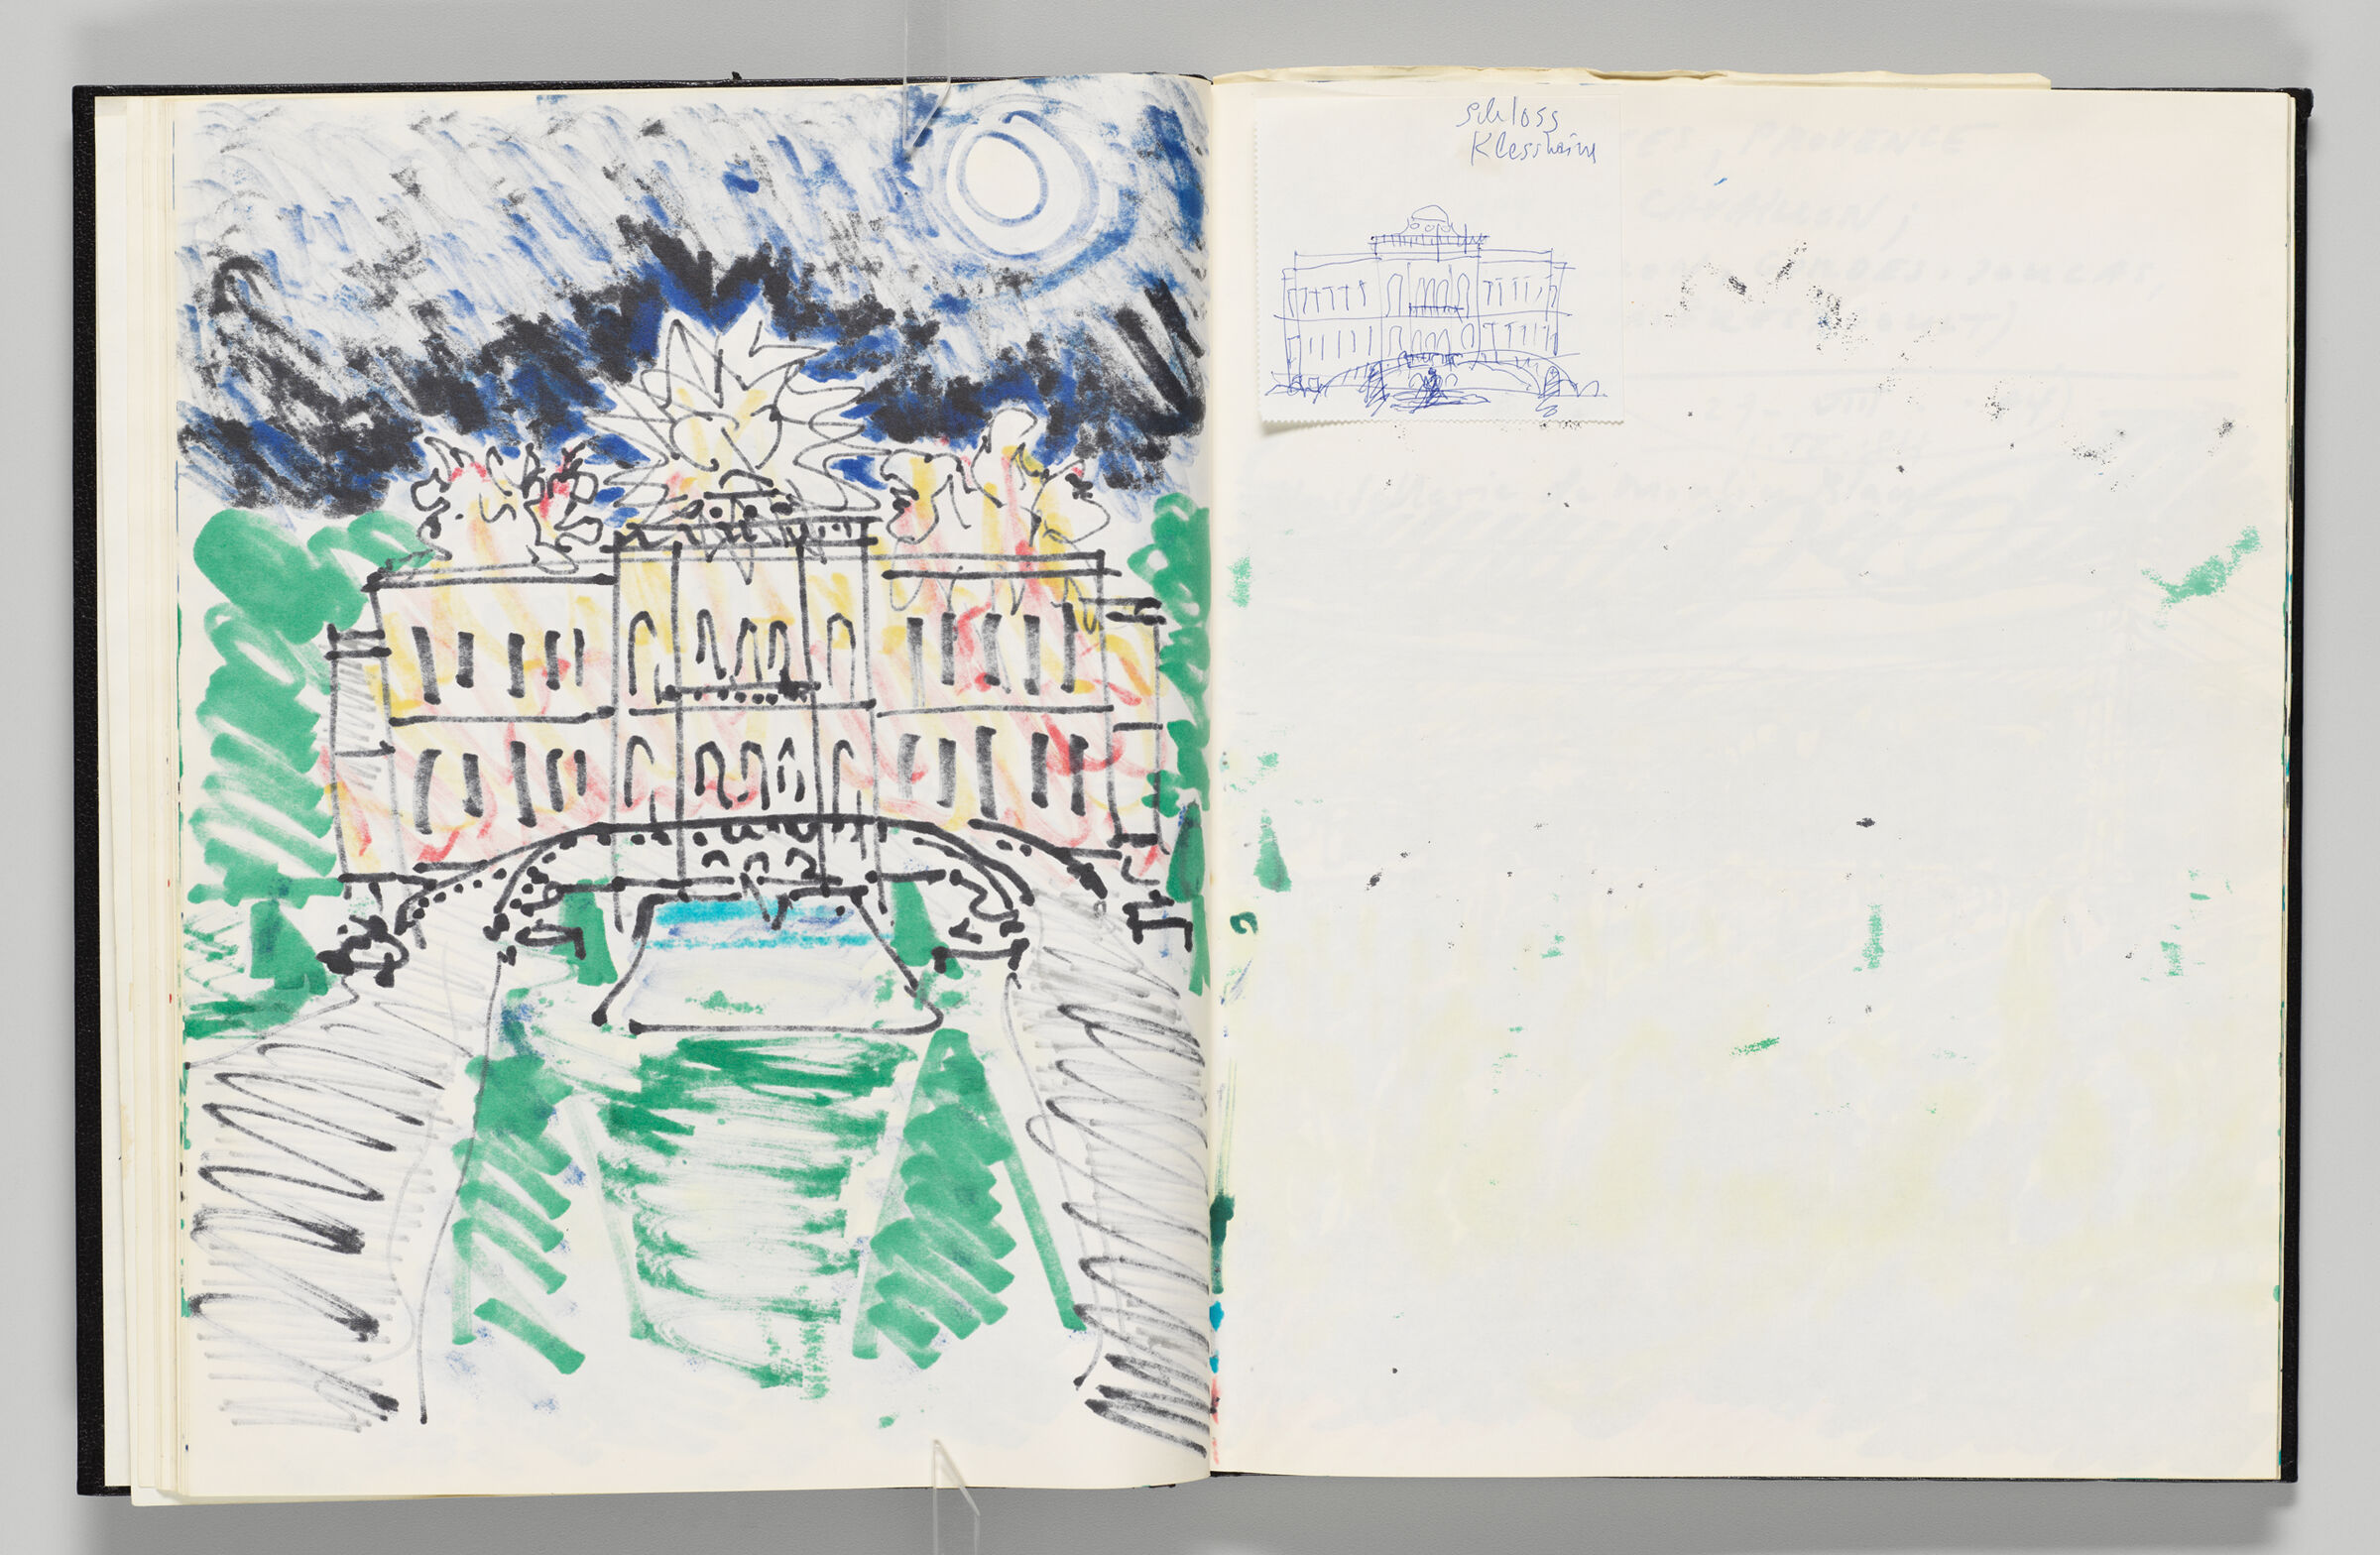 Untitled (Bleed-Through Of Previous Page, Left Page); Untitled (Small Pasted-In Sketch Of Schloss Klessheim With Color Transfer, Right Page)